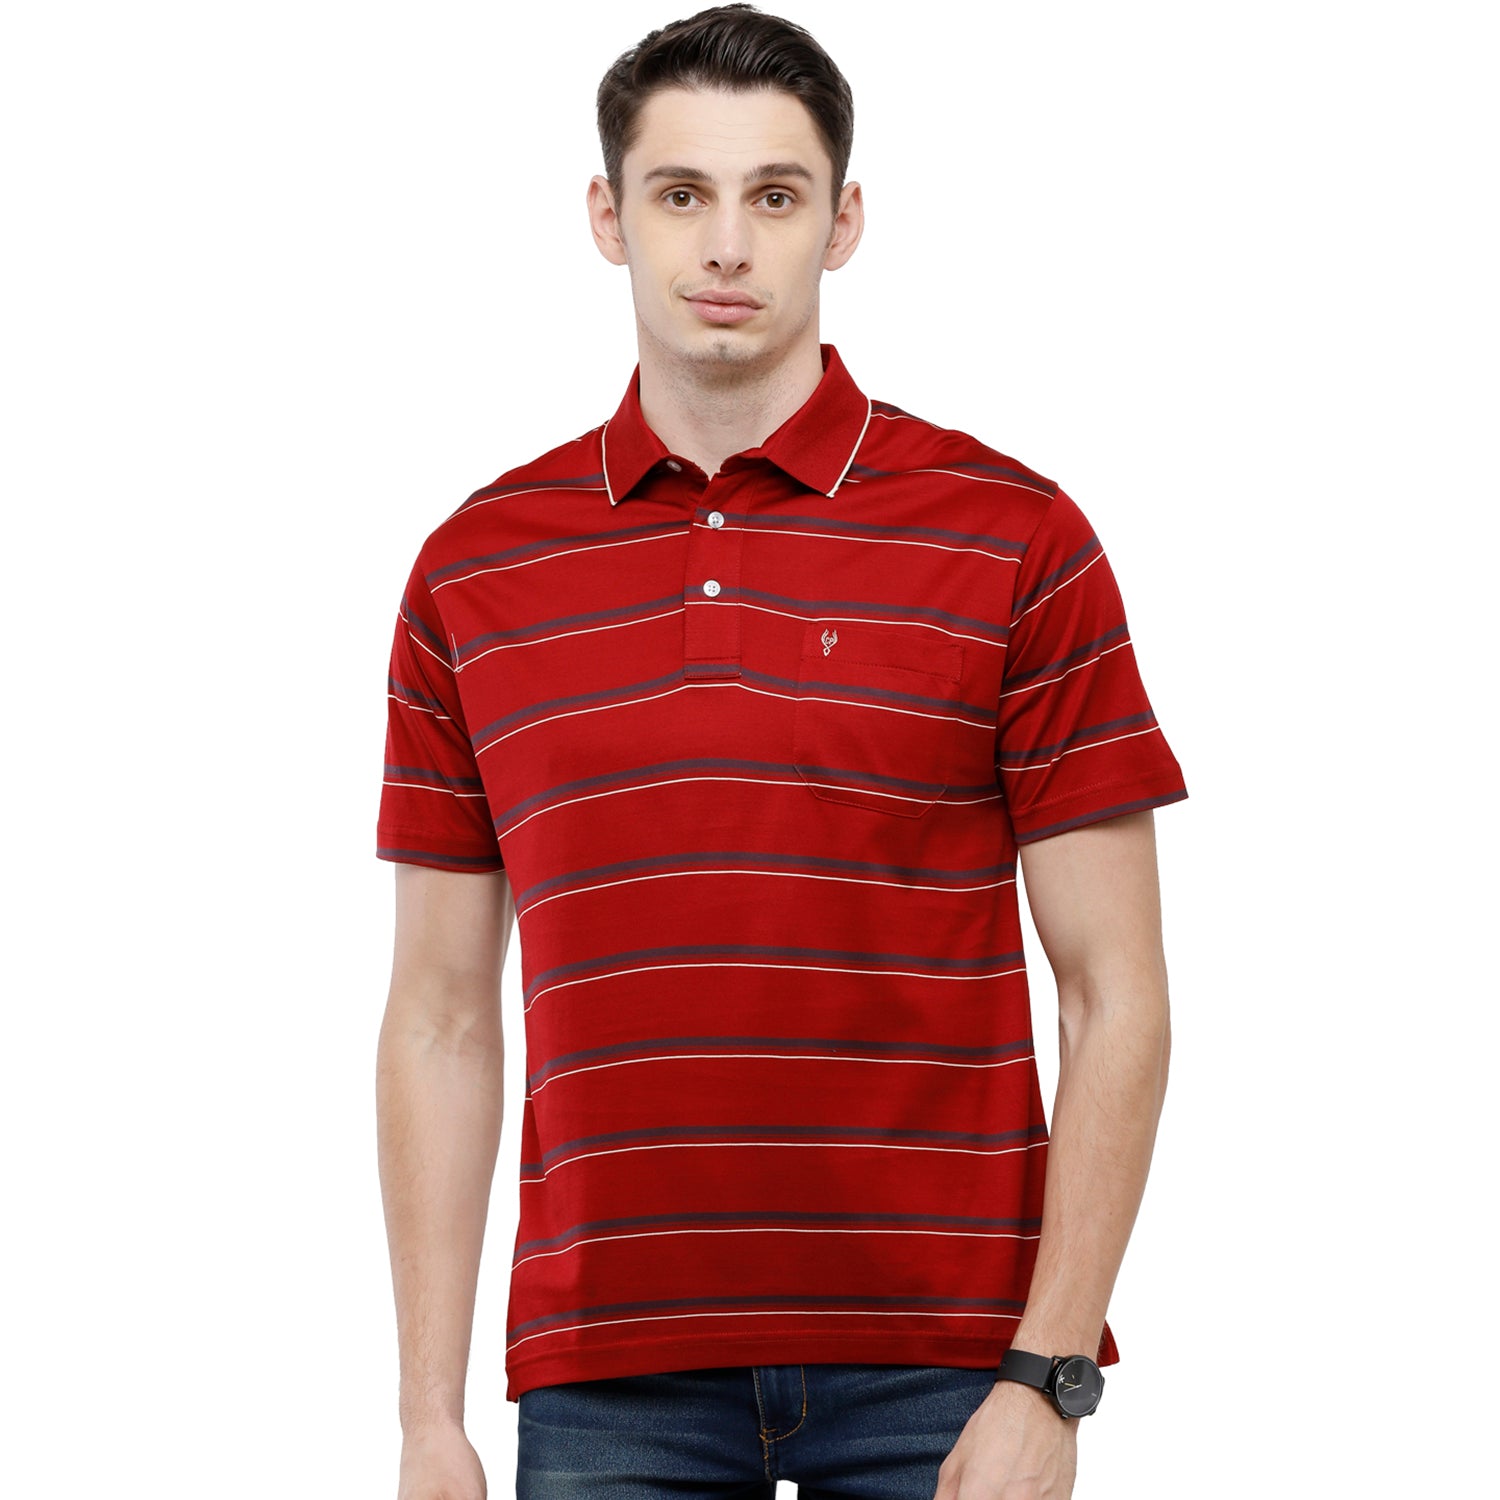 Classic Polo Men's Striped Authentic Fit Half Sleeve Premium Red Stripe T-Shirt - Ultimo - 259 A T-shirt Classic Polo 